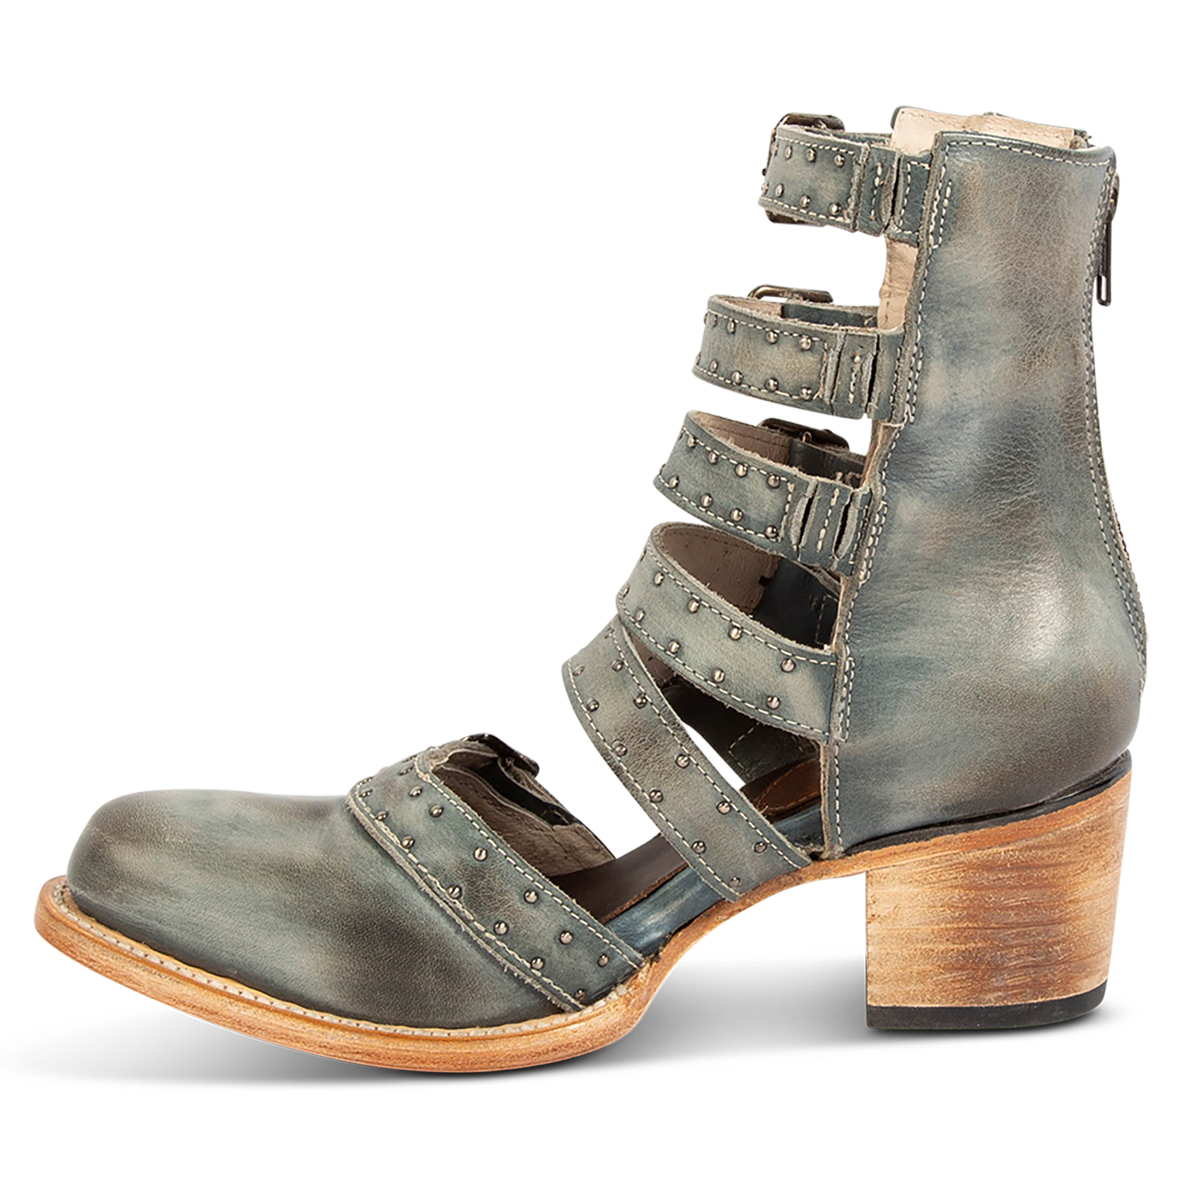 Inside view showing a stacked heel, adjustable leather straps and embellishments on FREEBIRD women's Salty blue leather bootie